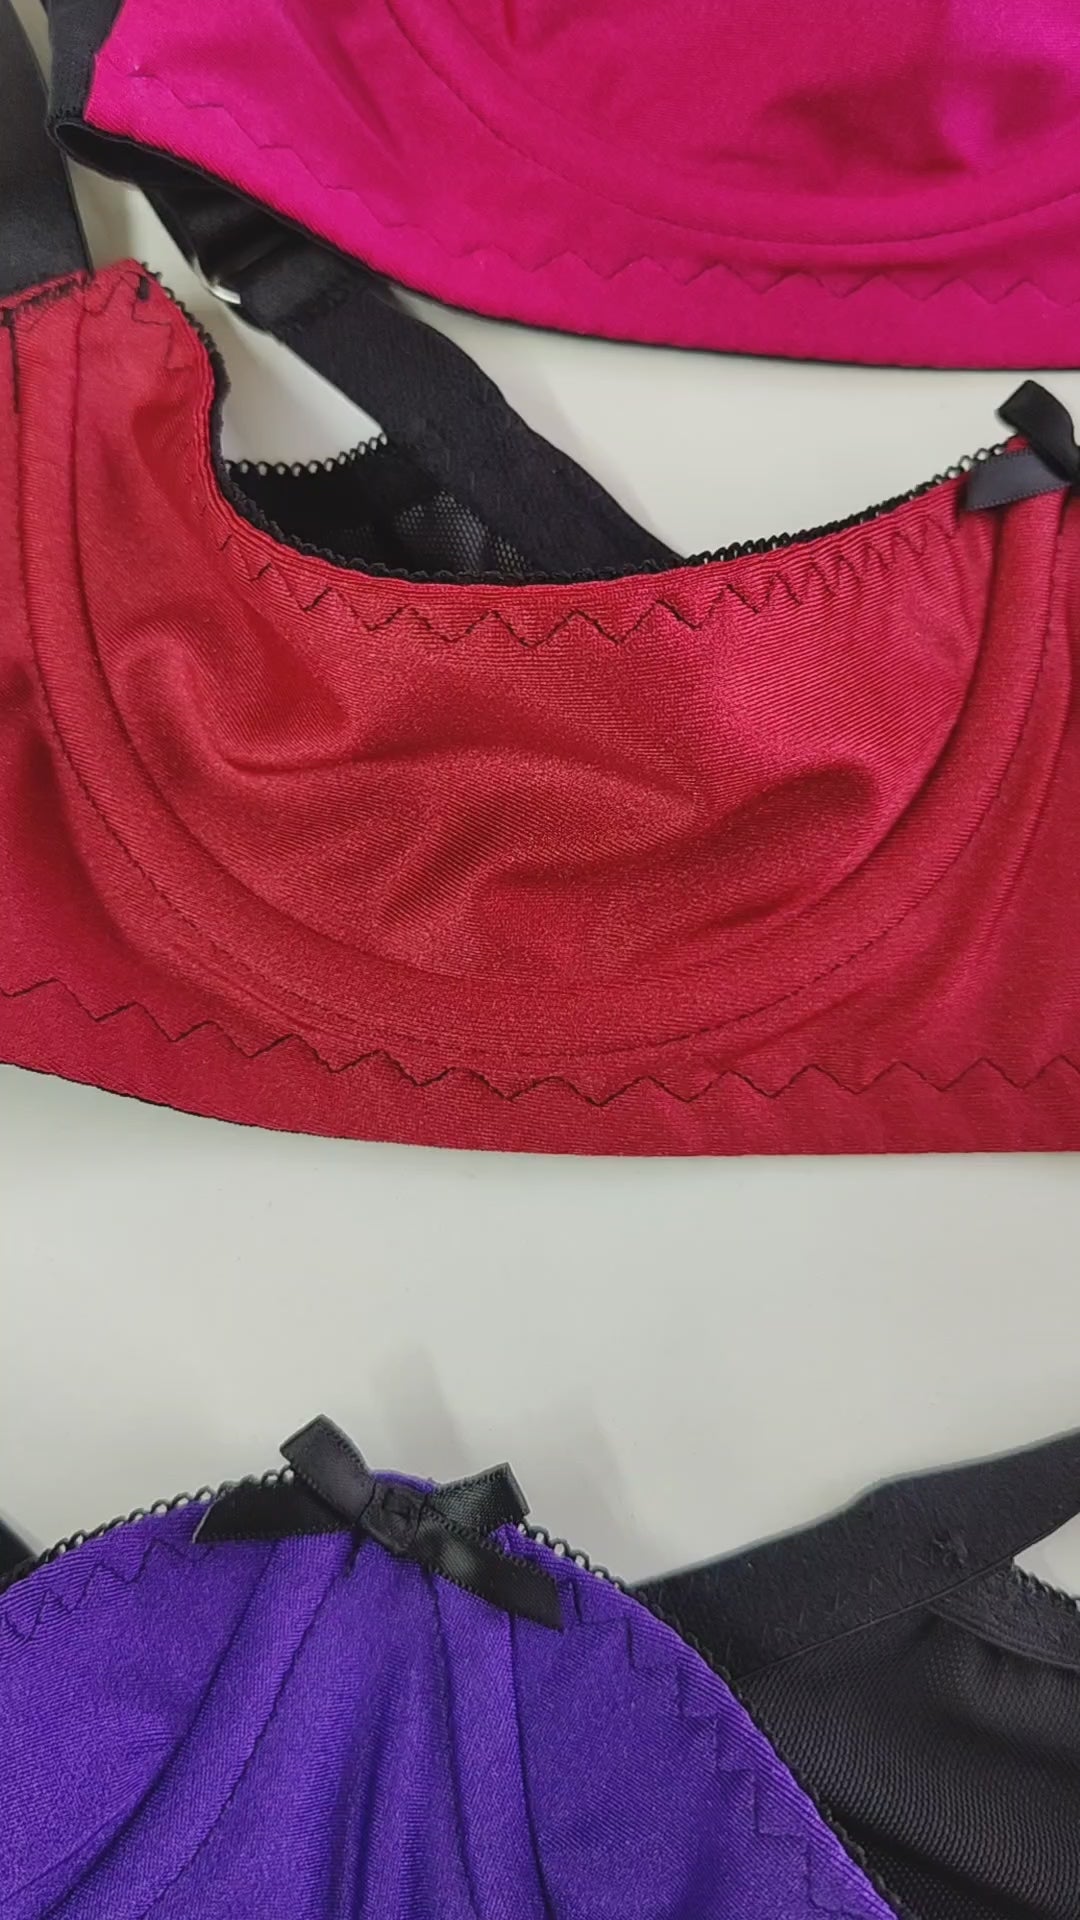 Used bra and panty